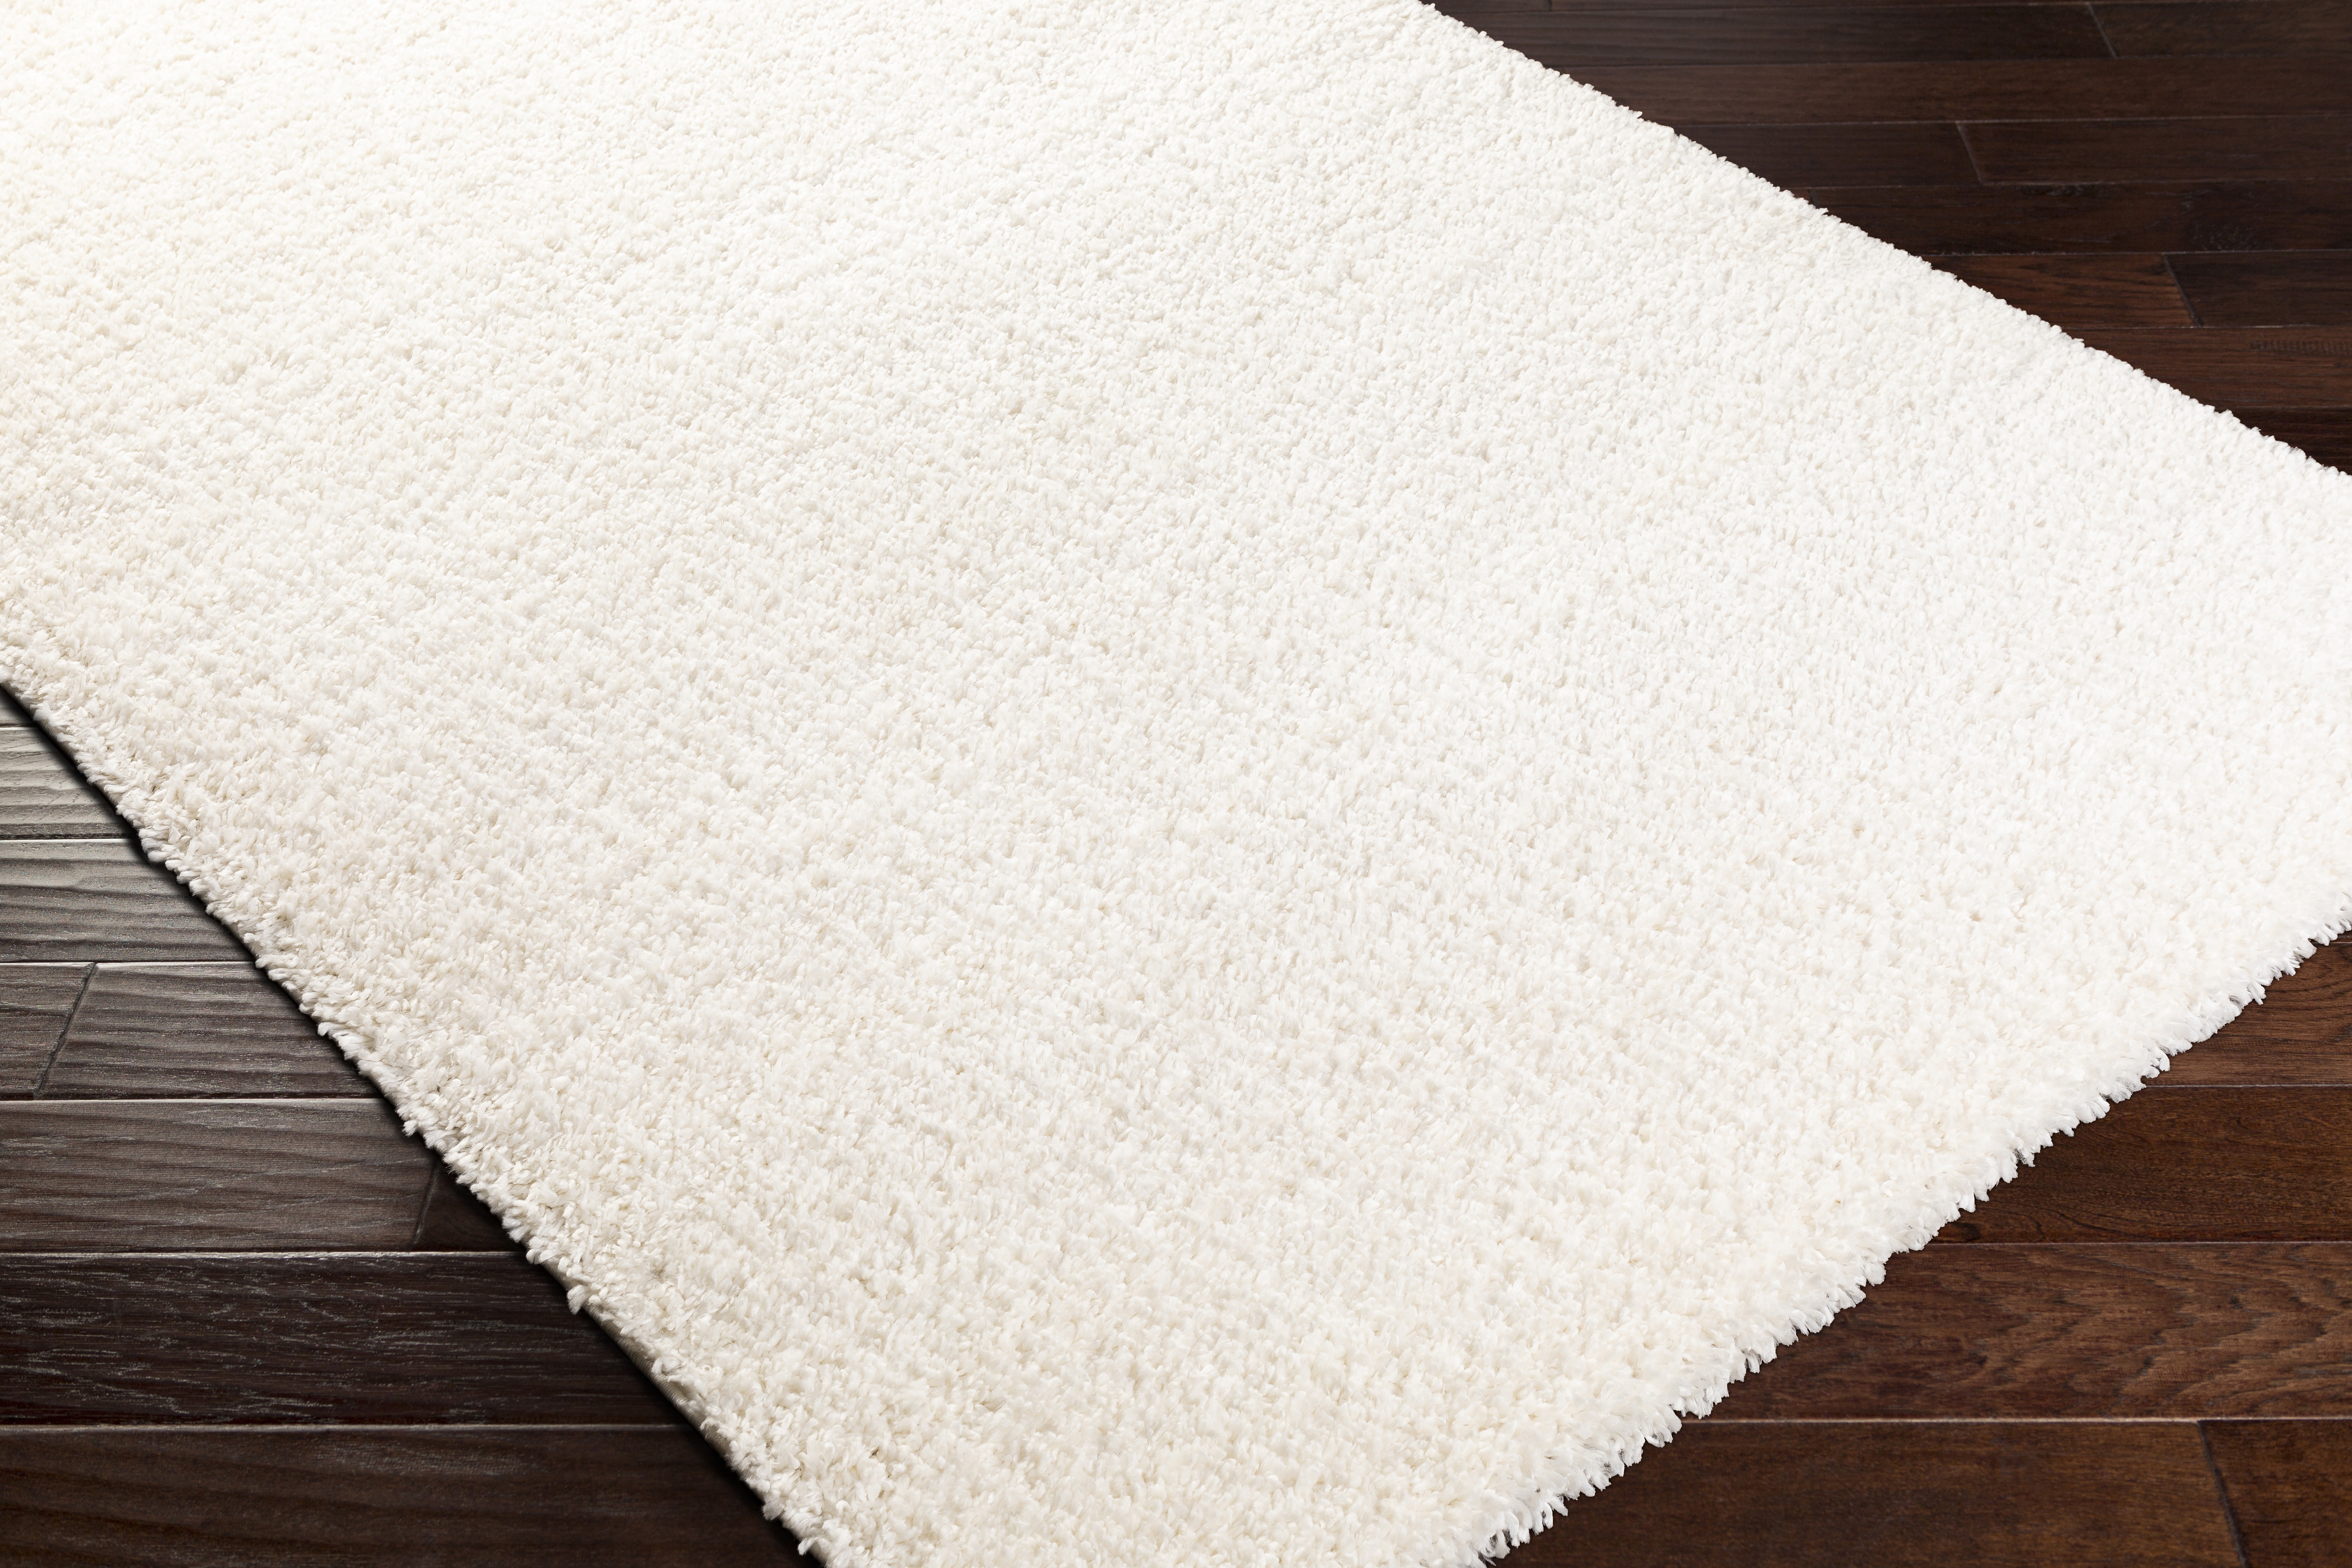 Deluxe Shag Rug, 8'10" x 12' - Image 6